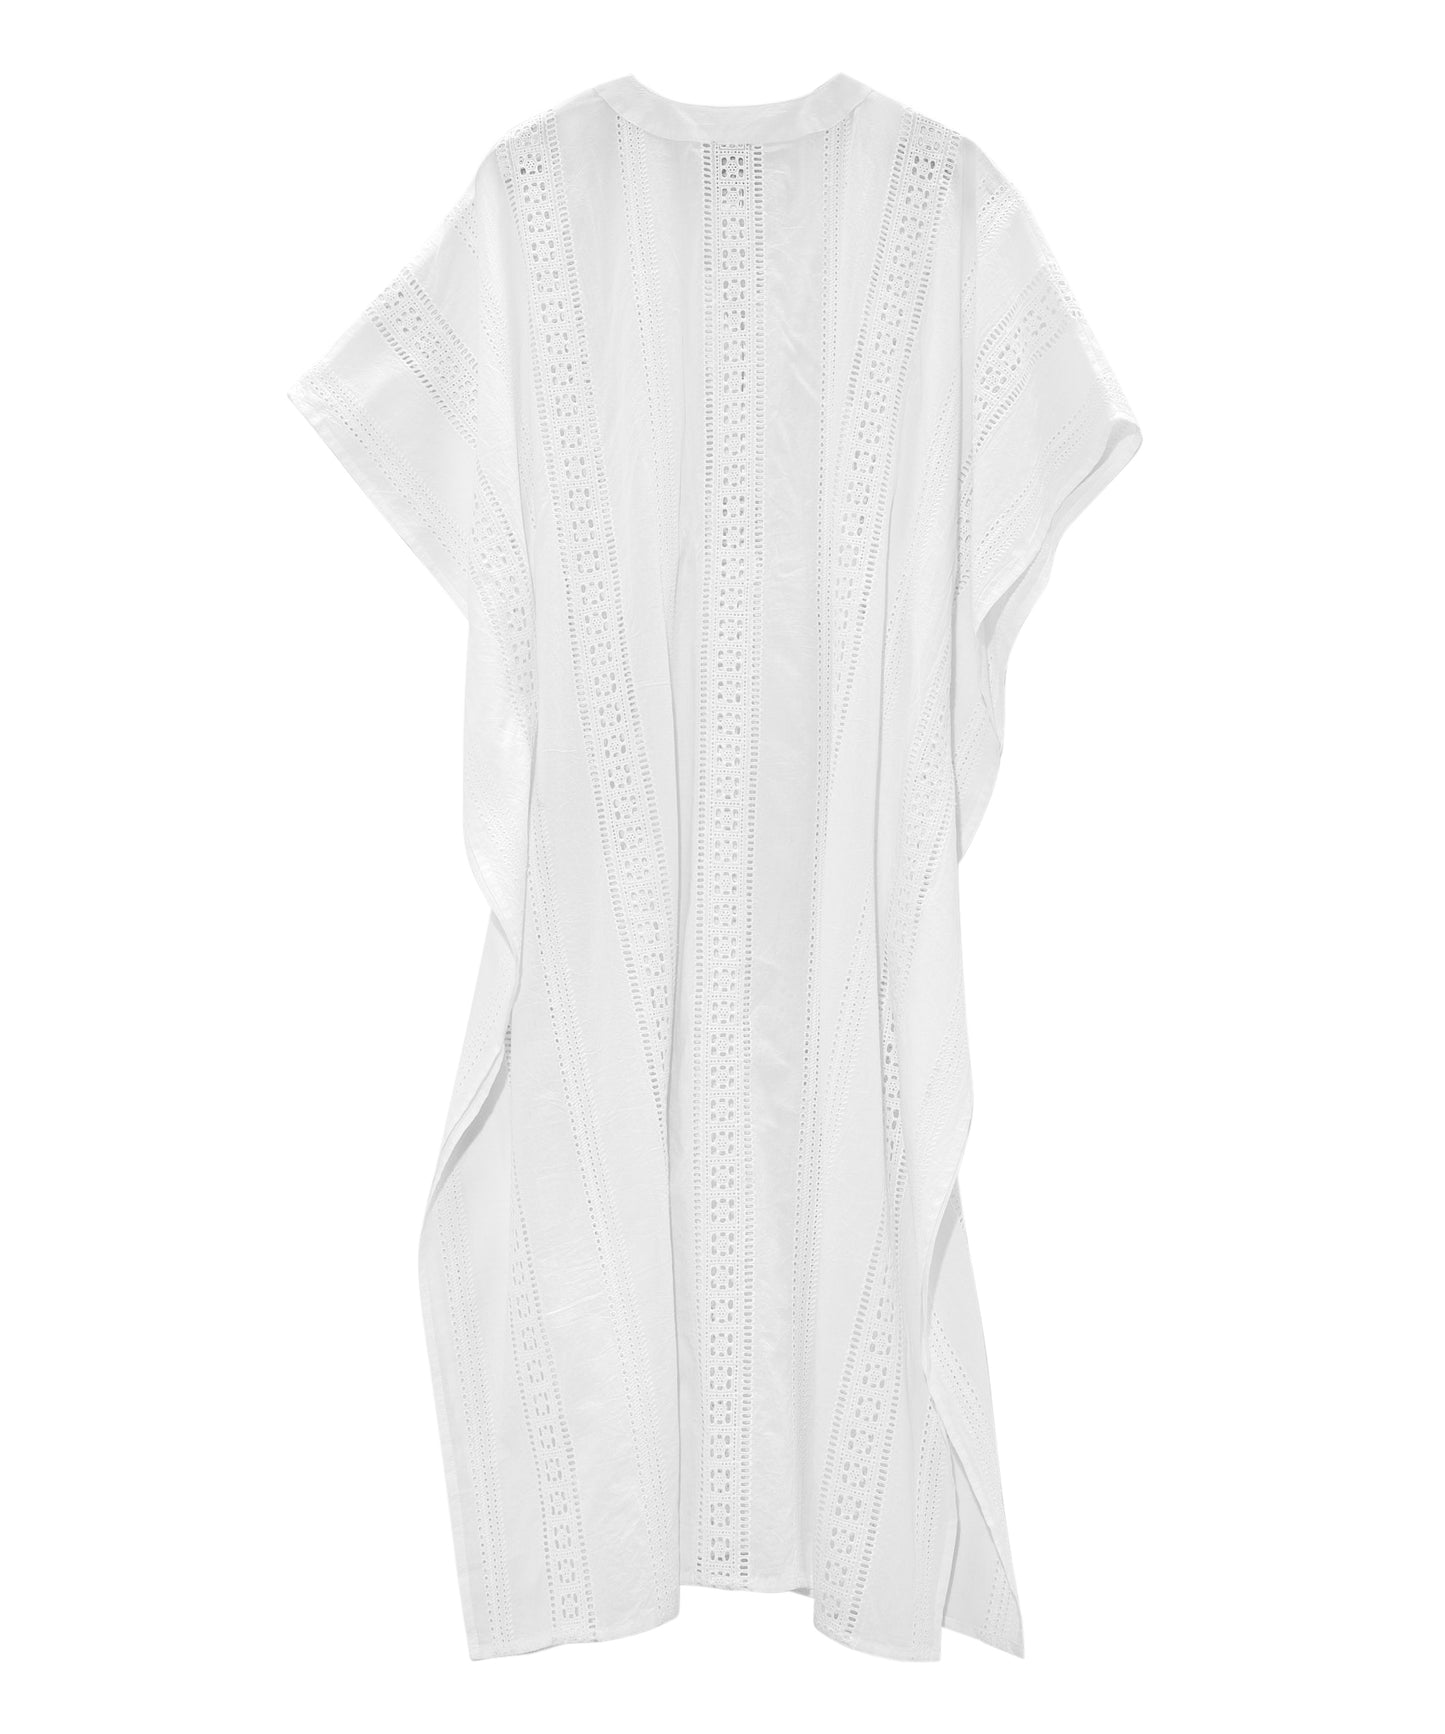 Eyelet Maxi Caftan in color White